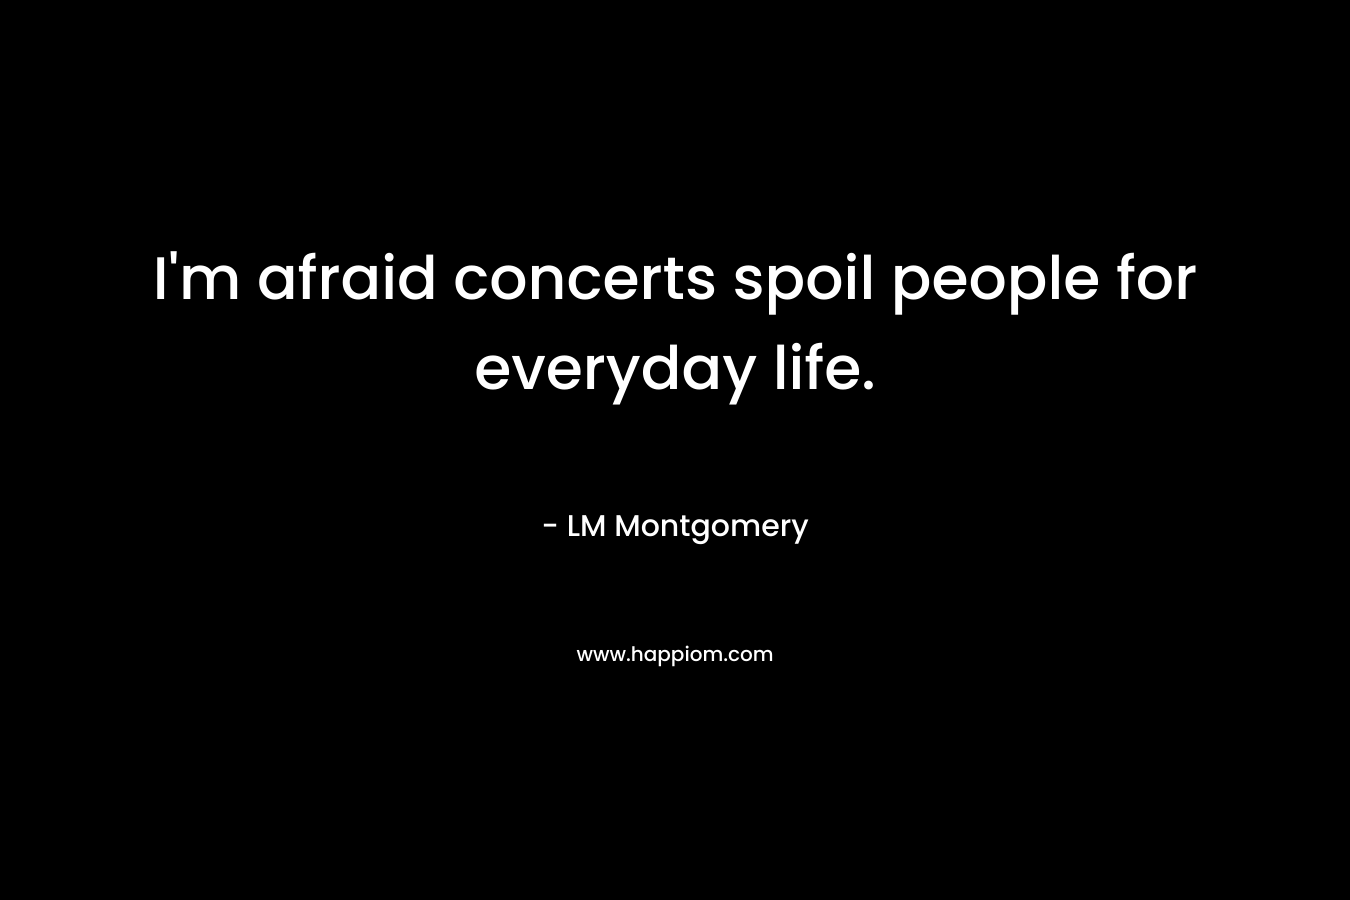 I'm afraid concerts spoil people for everyday life.